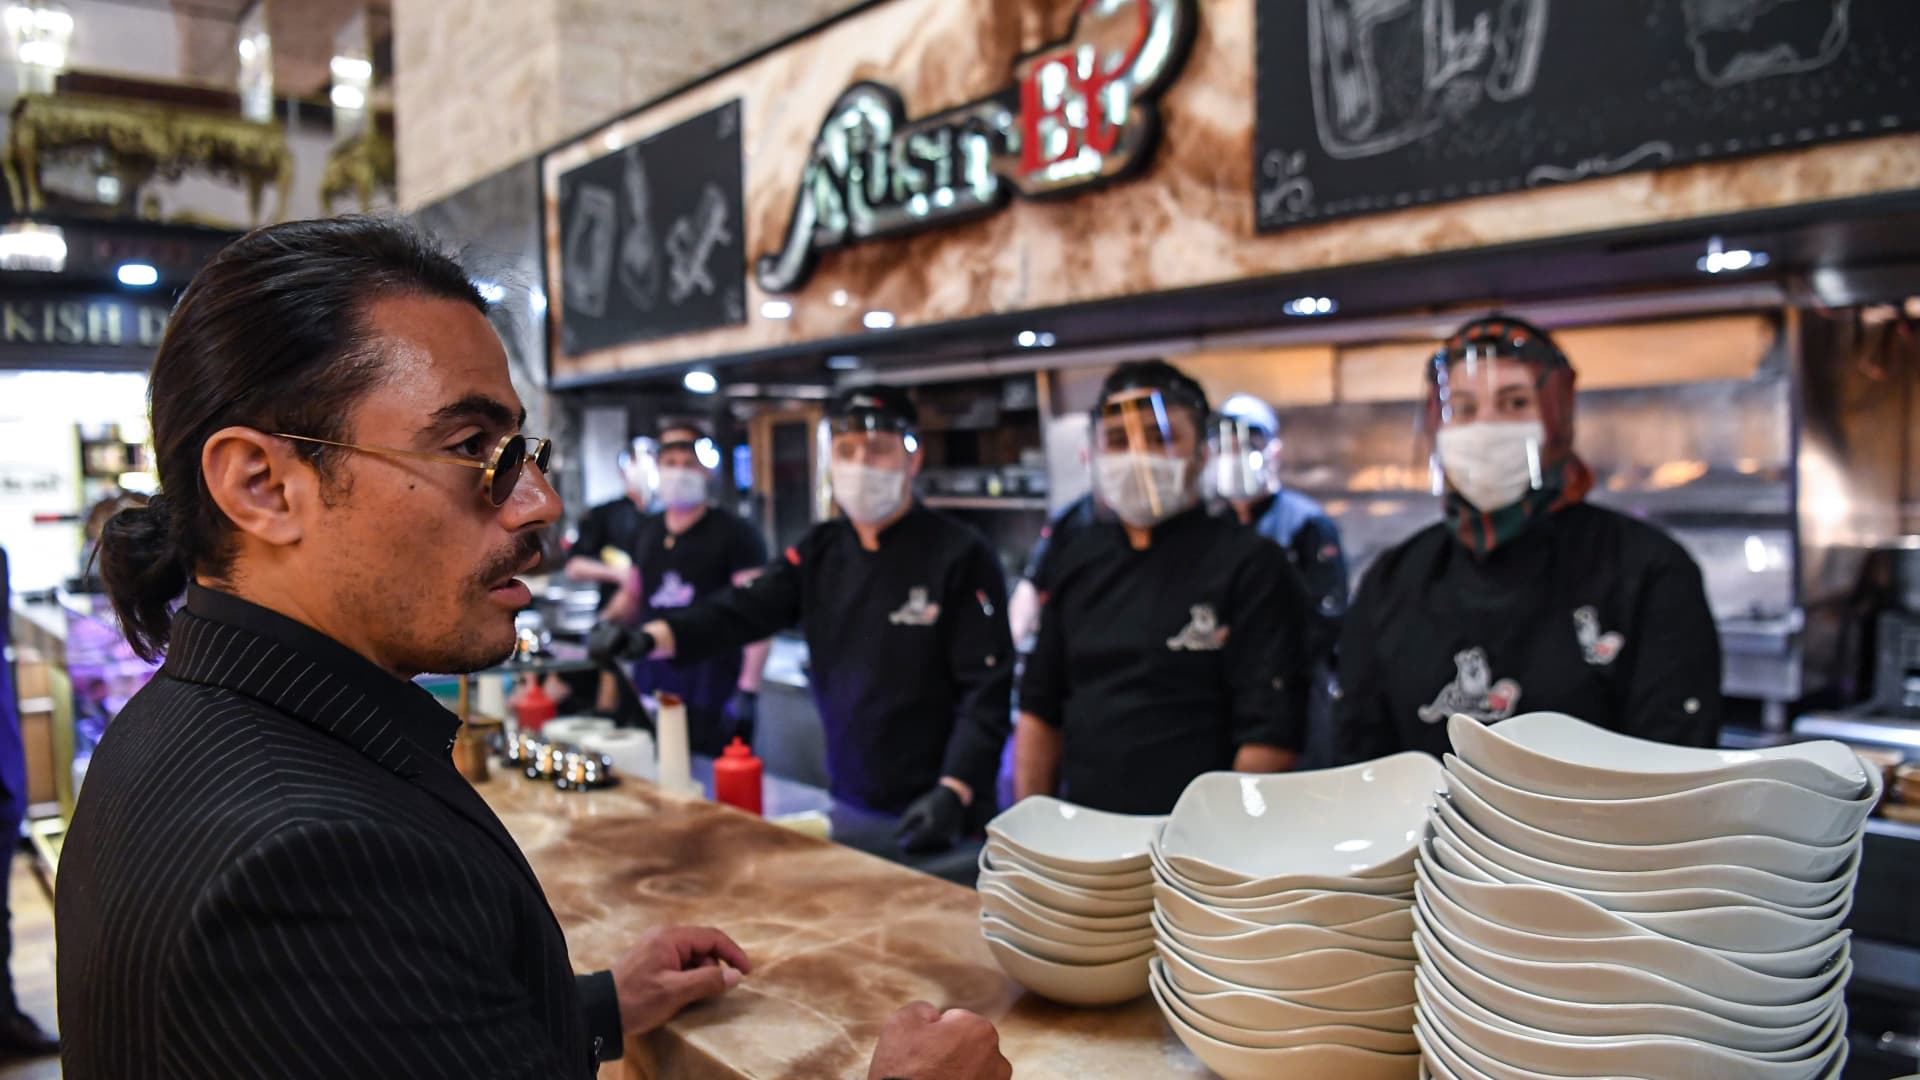 Turkish restaurateur Nusret Gokce, also known as 'Salt Bae', speaks to his staff at his restaurant 'Nusr-Et' at the Grand Bazaar after its reopening on June 1, 2020 in Istanbul.